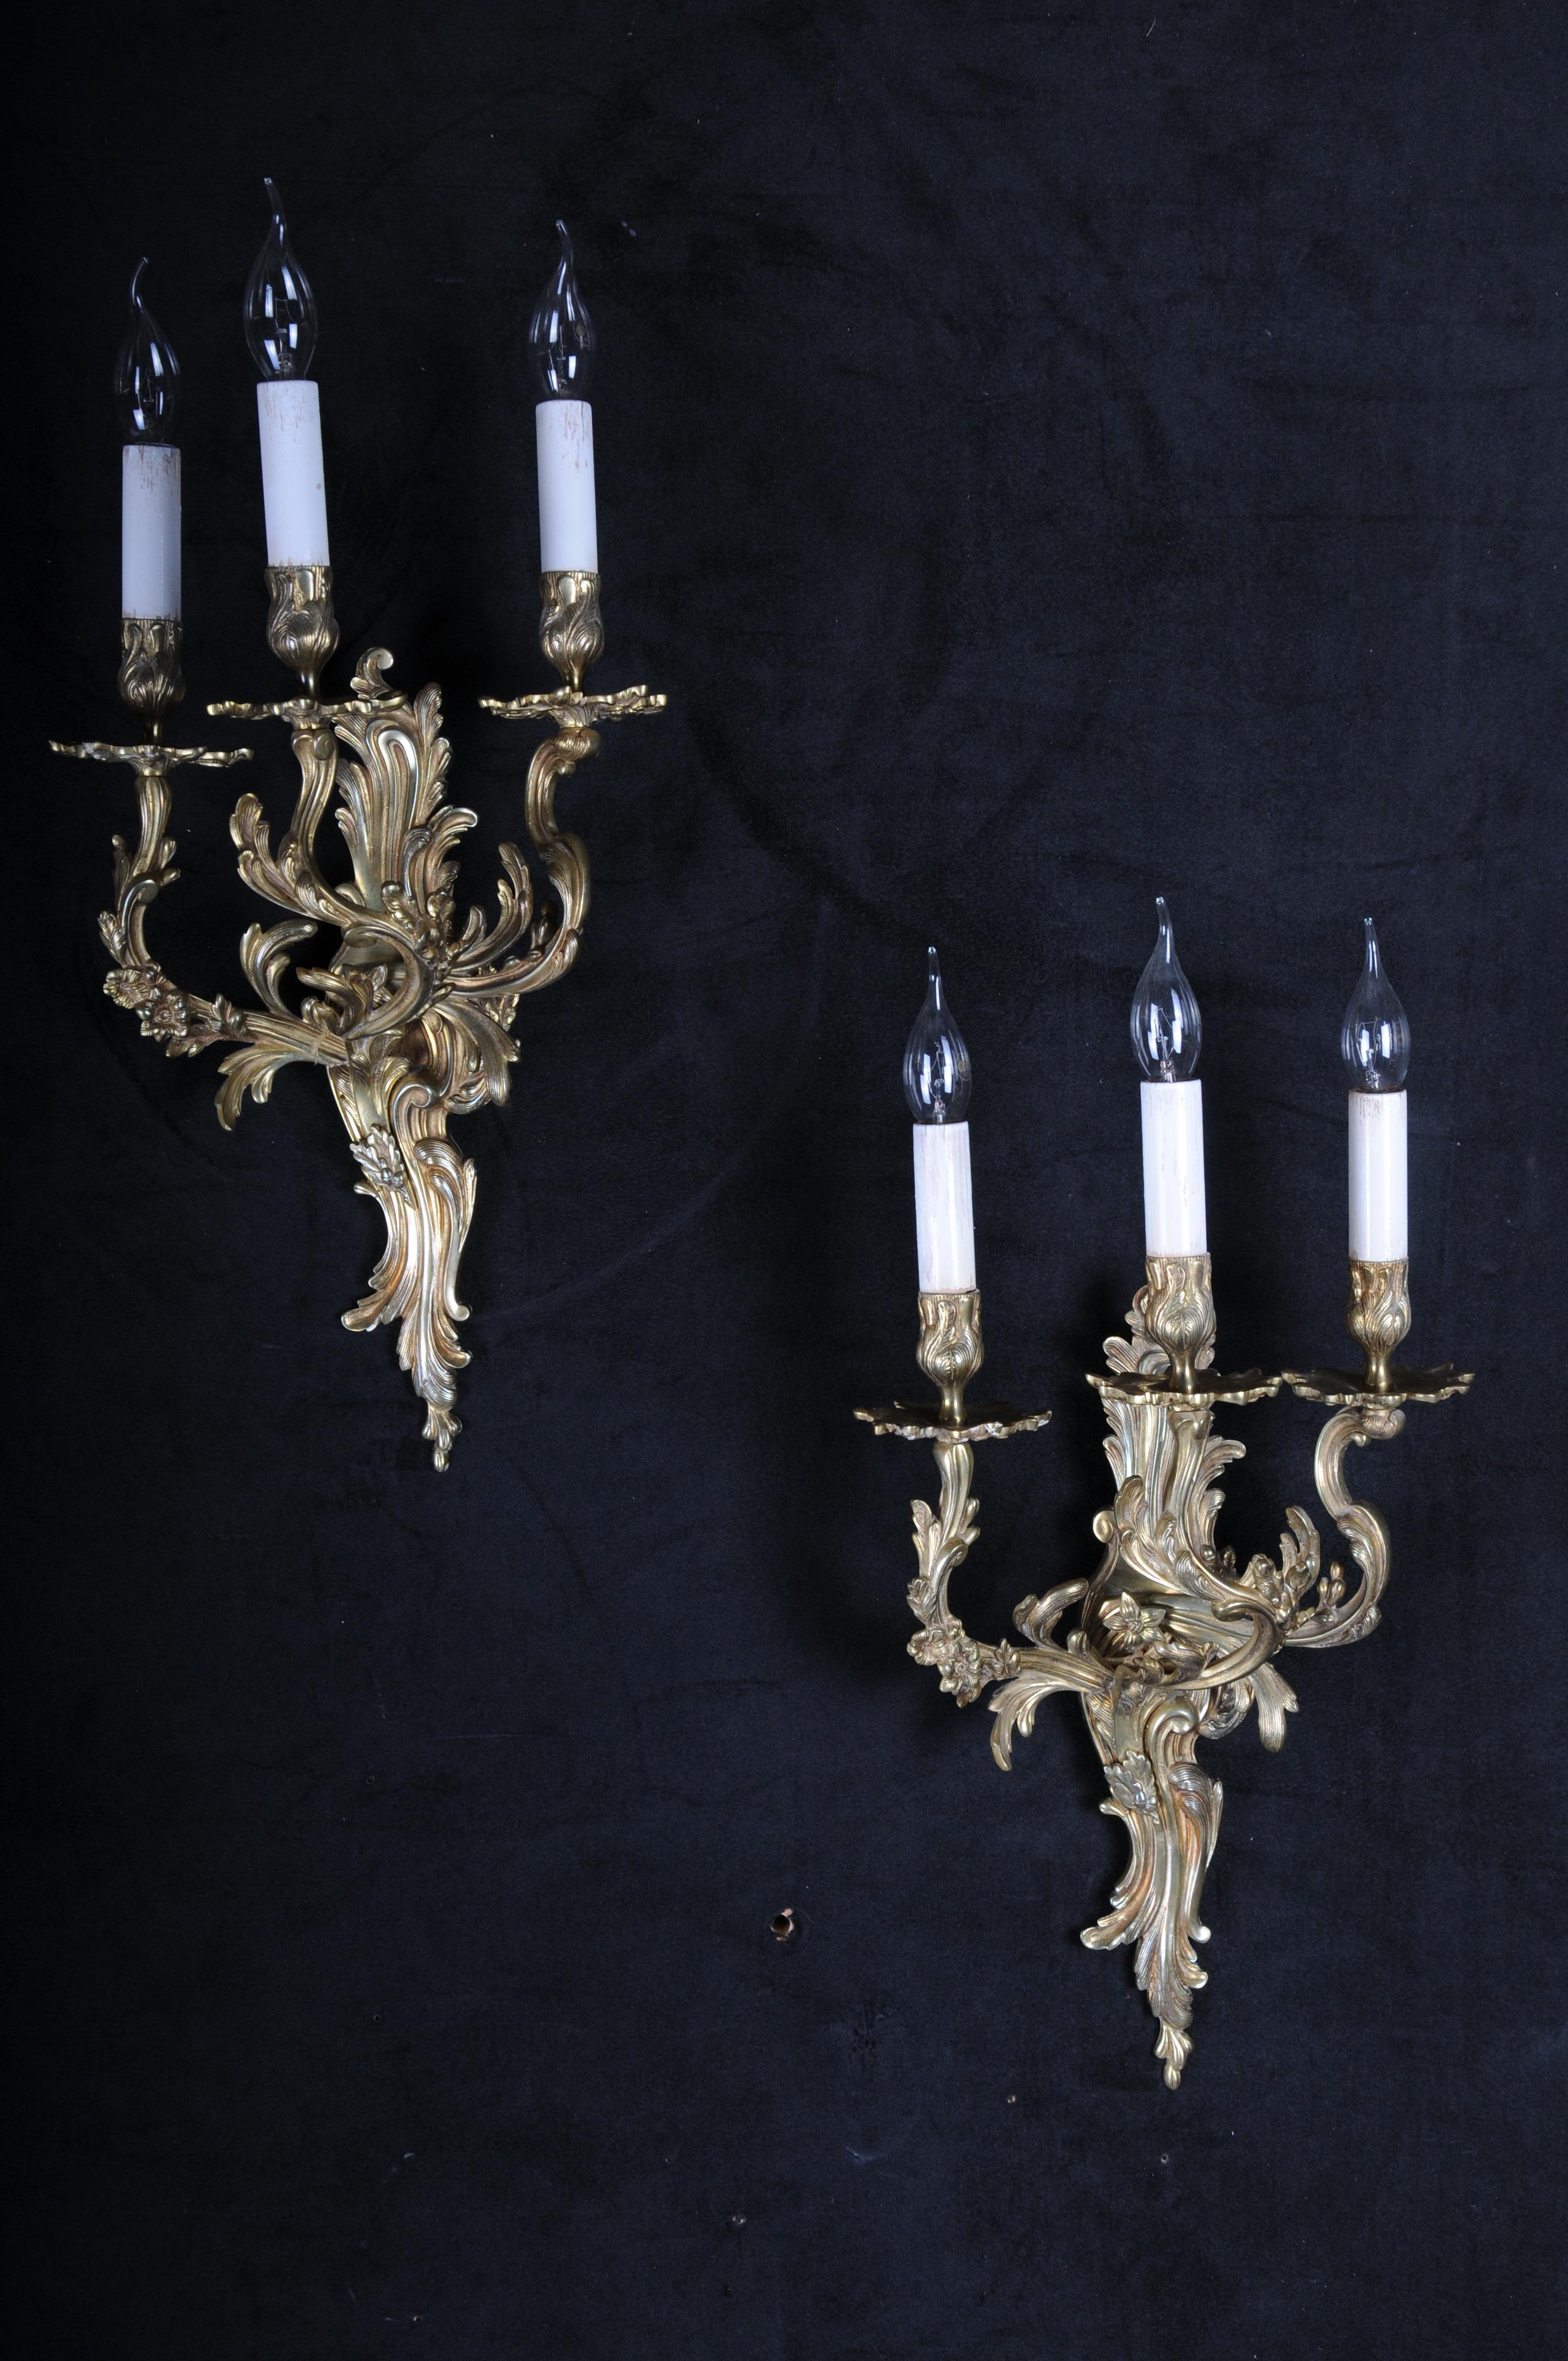 Pair (2) of antique Louis XV wall lamps, bronze

Extremely decorative and magnificent bronze wall lamps, classic shape with curved rocialli arm lamp. Each chandelier has three light bulb sockets. Electrically tested and adjusted to US standards.